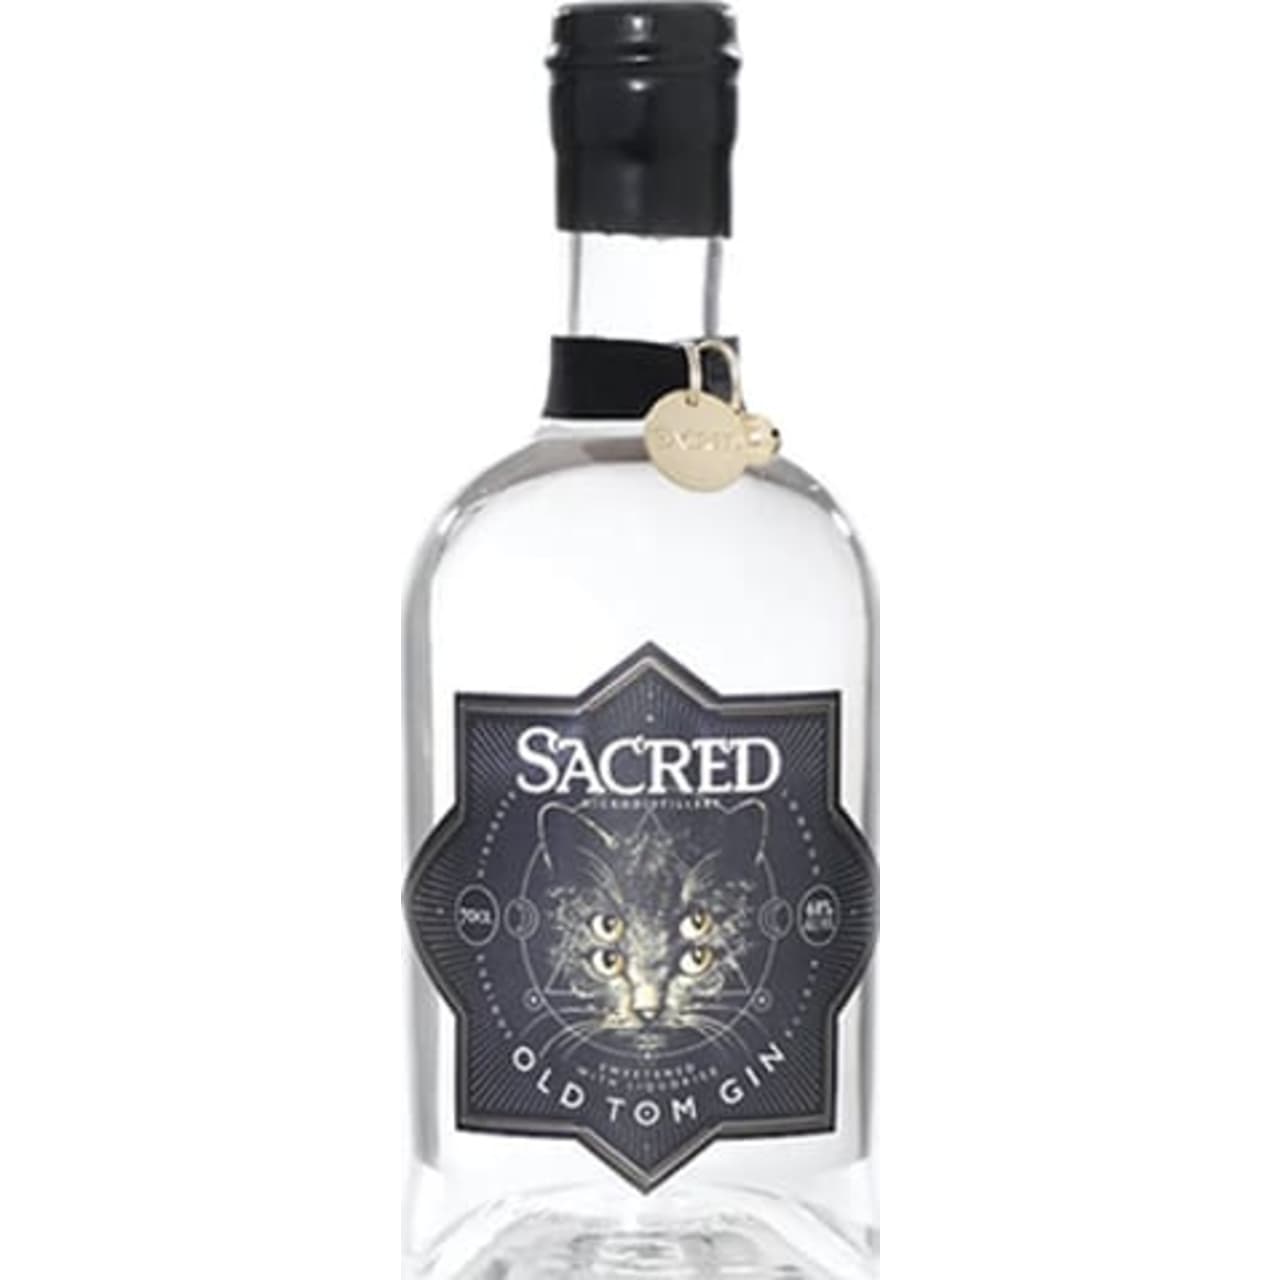 Product Image - Sacred Old Tom Gin